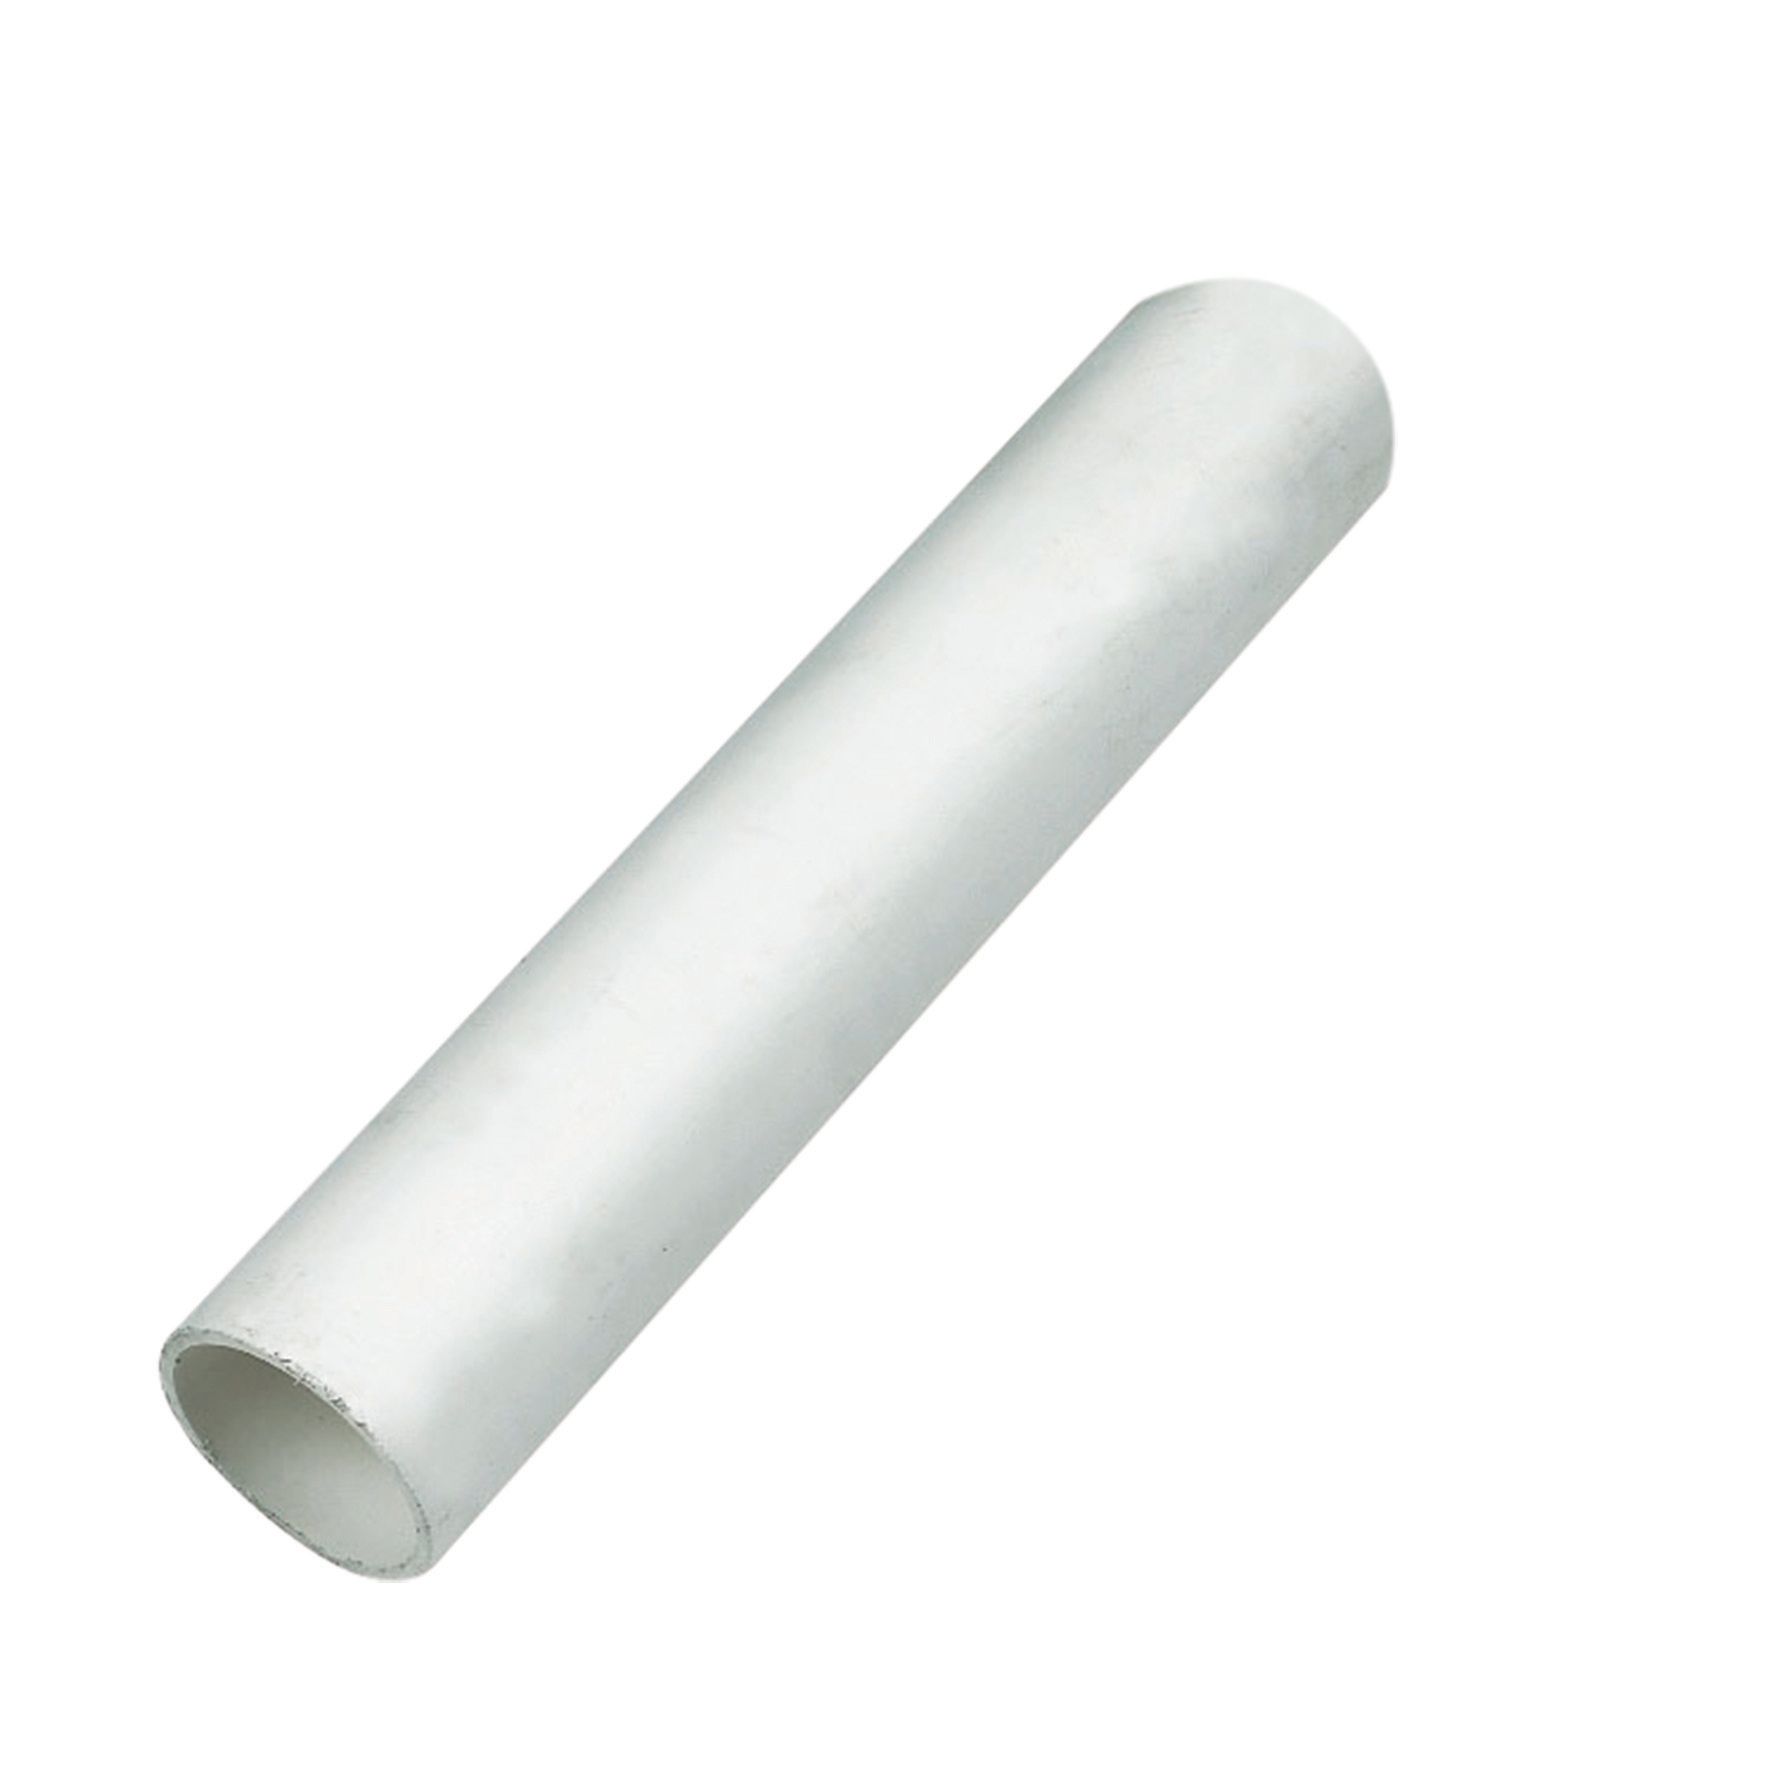 Image of FloPlast WP02W Push-fit Waste Pipe - White 40mm x 3m